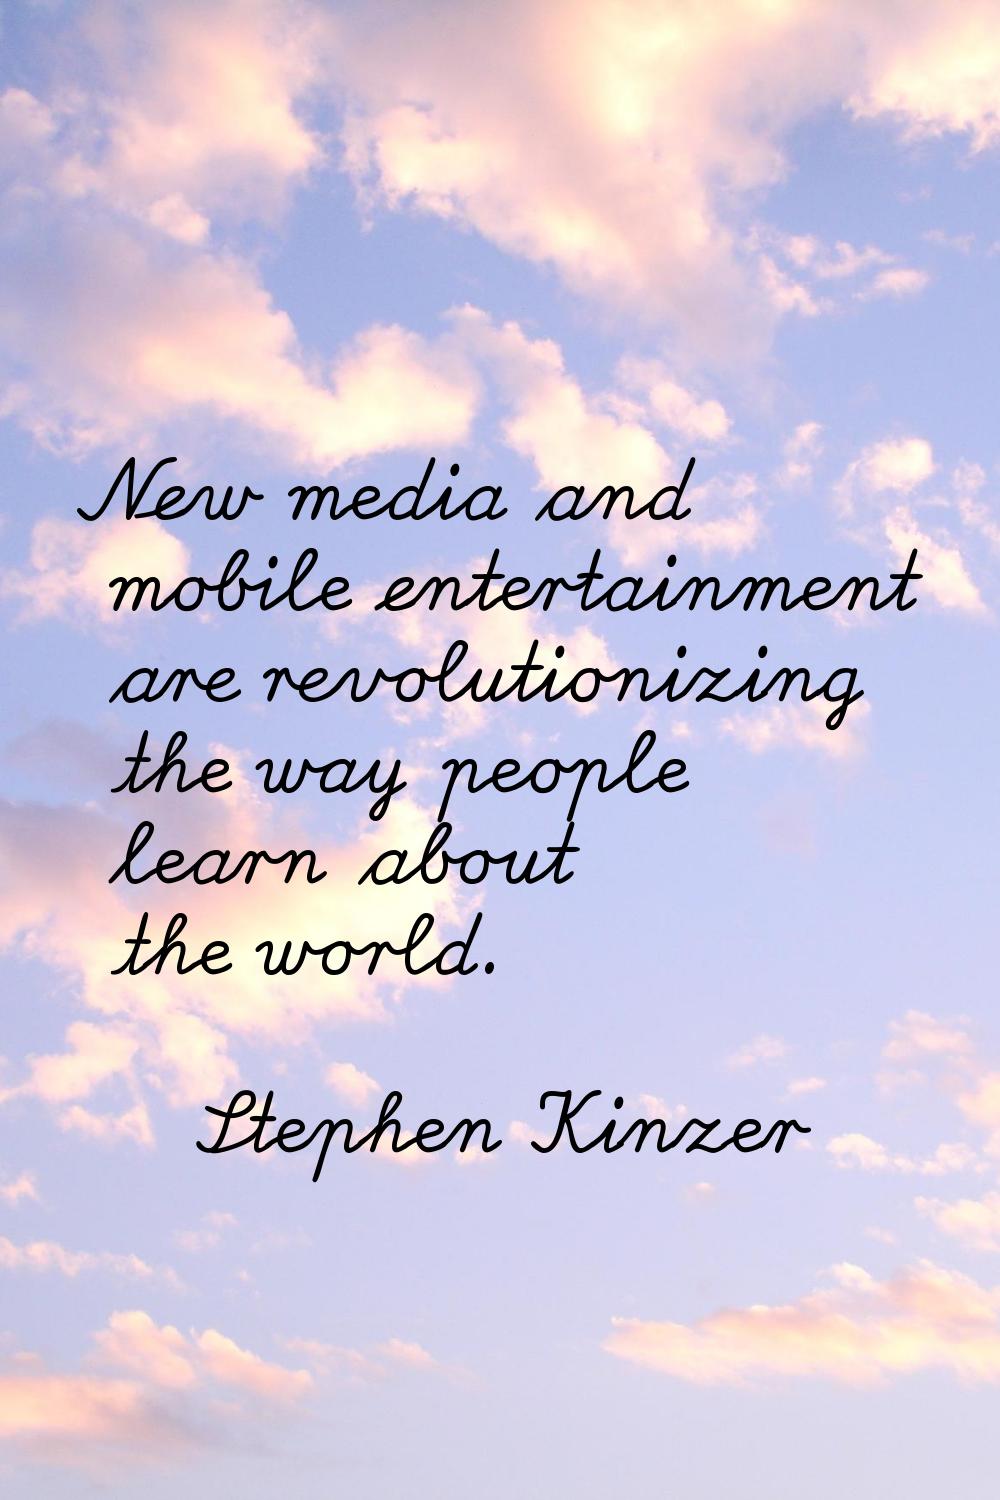 New media and mobile entertainment are revolutionizing the way people learn about the world.